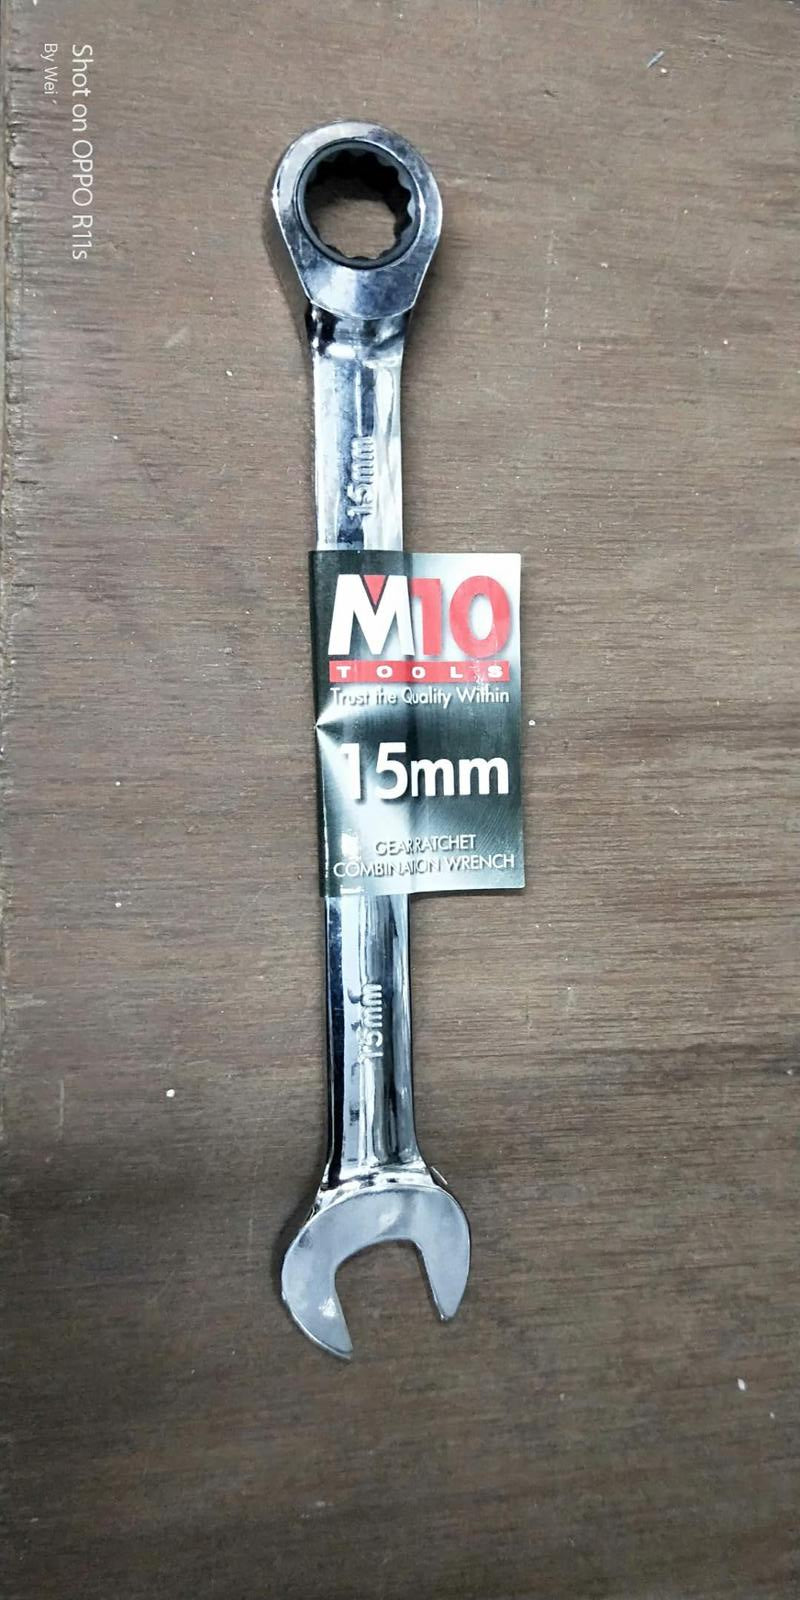 M10 Gear Ratchet Long Combination Wrench | Model : 005-053 | Size : 6mm - 32mm Ratchet Combination Wrench M10 